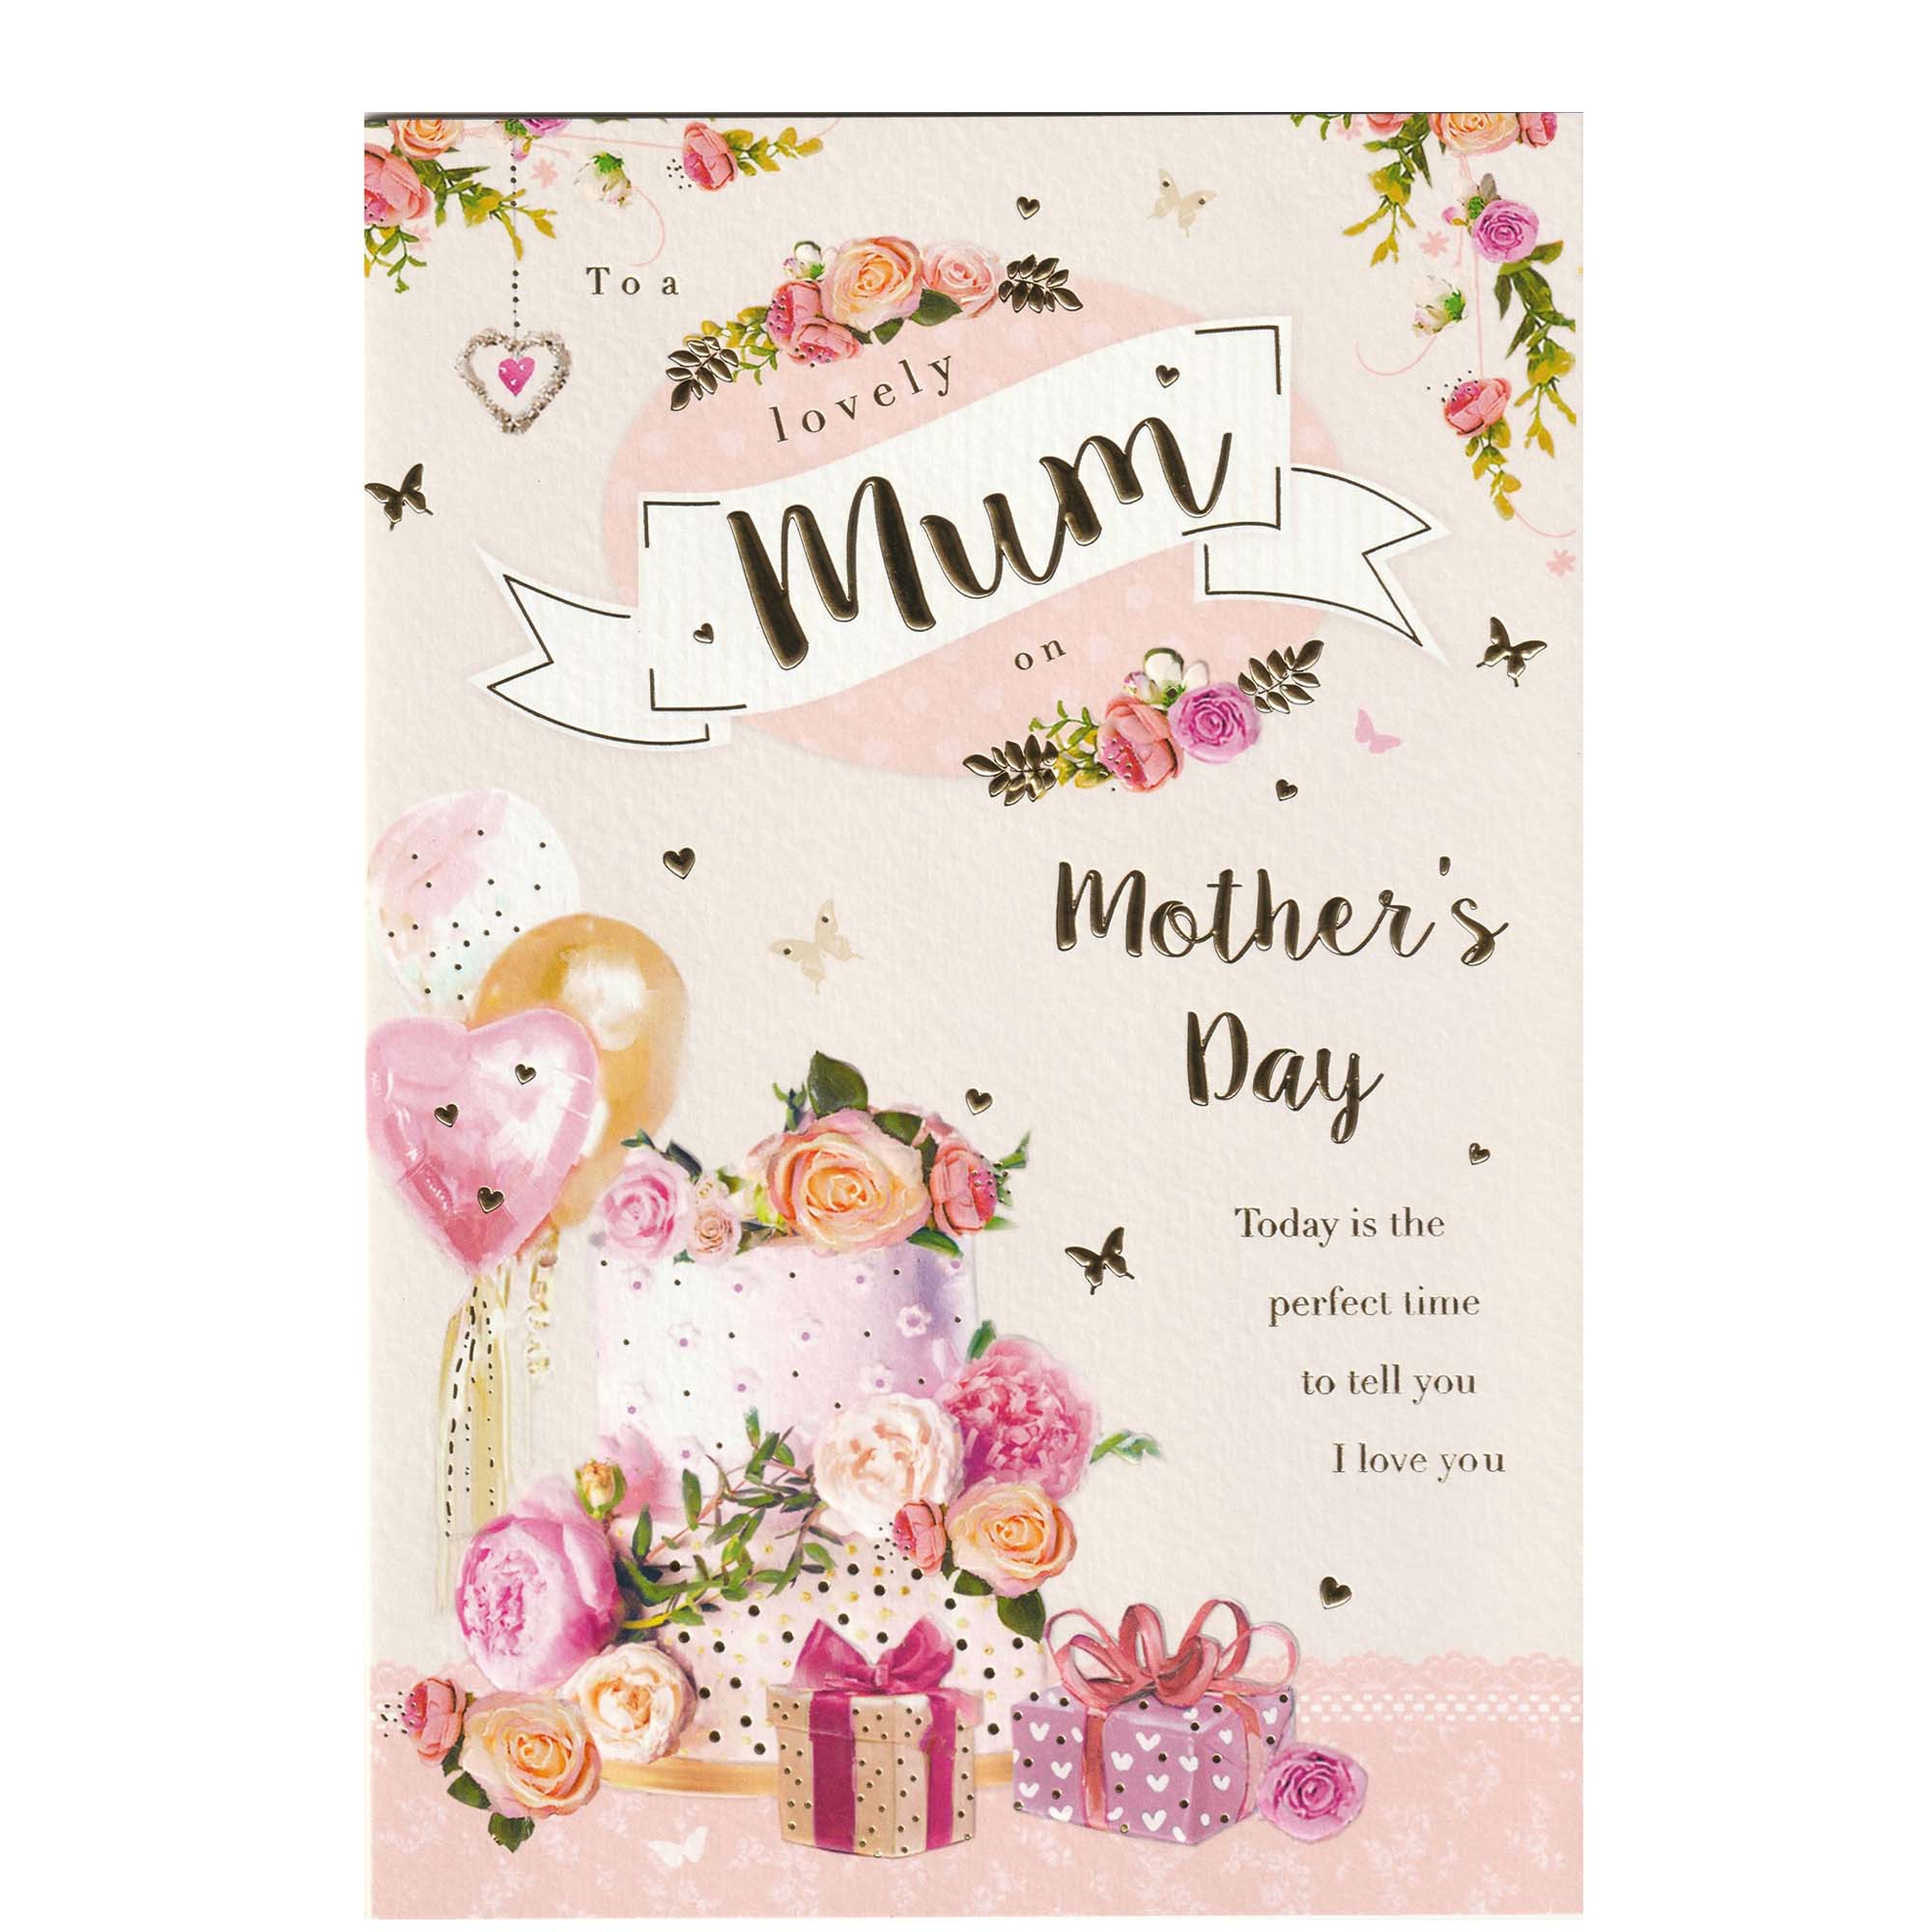 Lovely Mum On Mothers Day Greeting Card